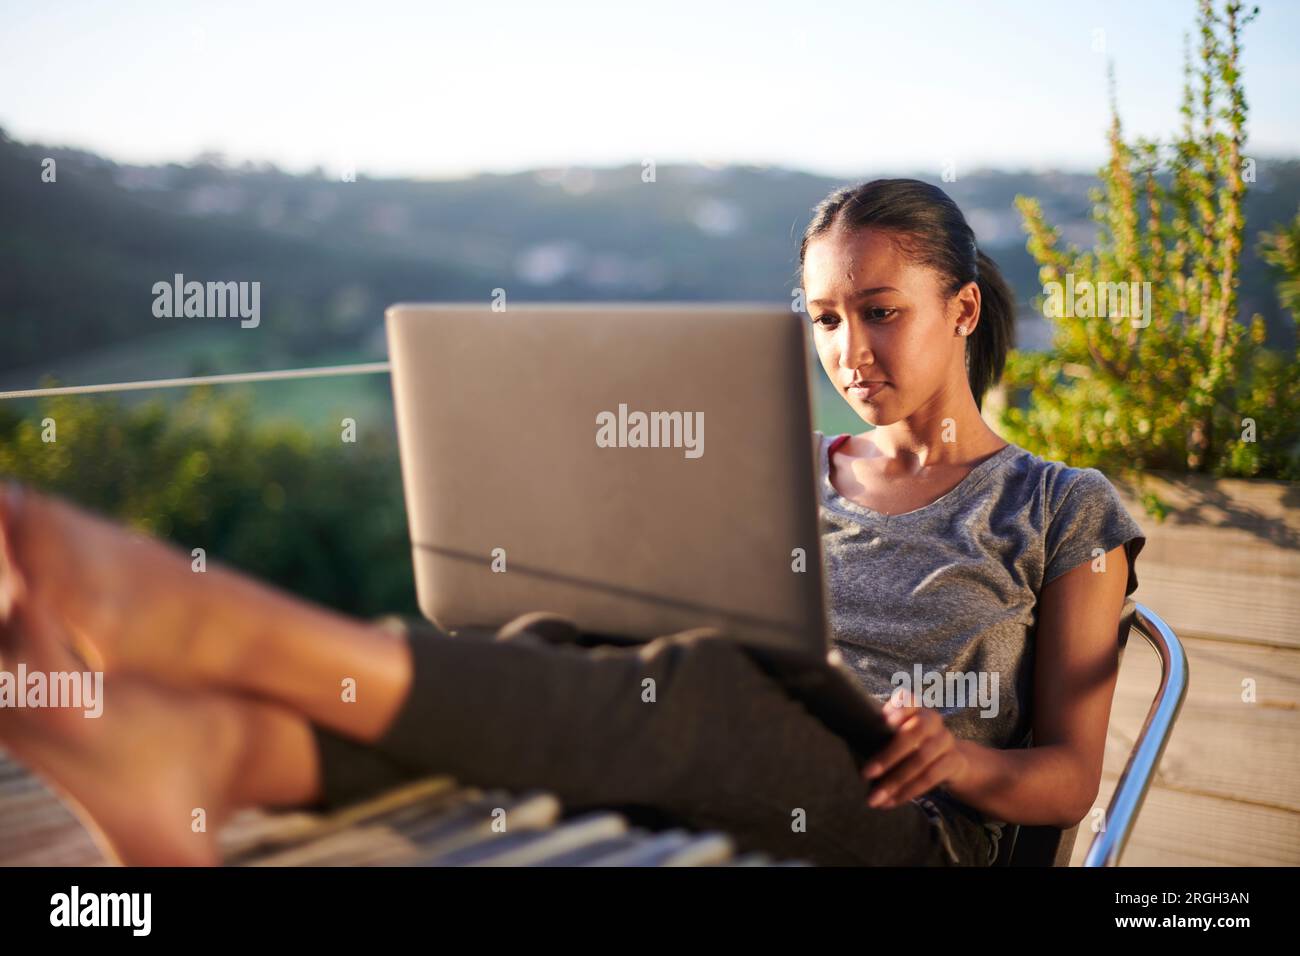 https://c8.alamy.com/comp/2RGH3AN/young-woman-using-laptop-on-balcony-at-sunset-2RGH3AN.jpg